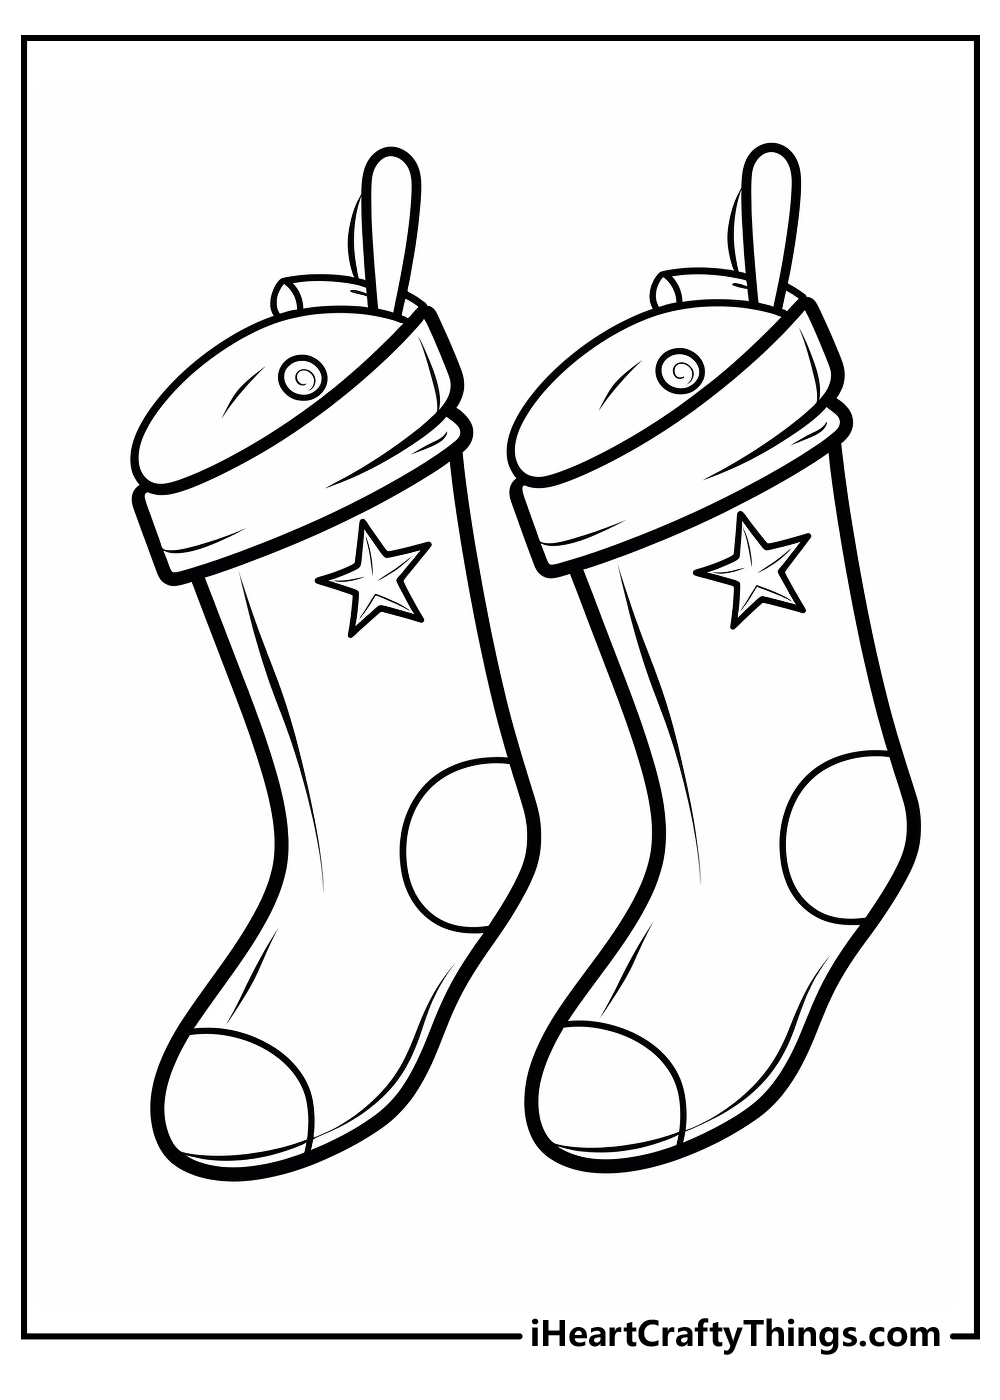 Christmas Stocking Coloring Sheet for kids